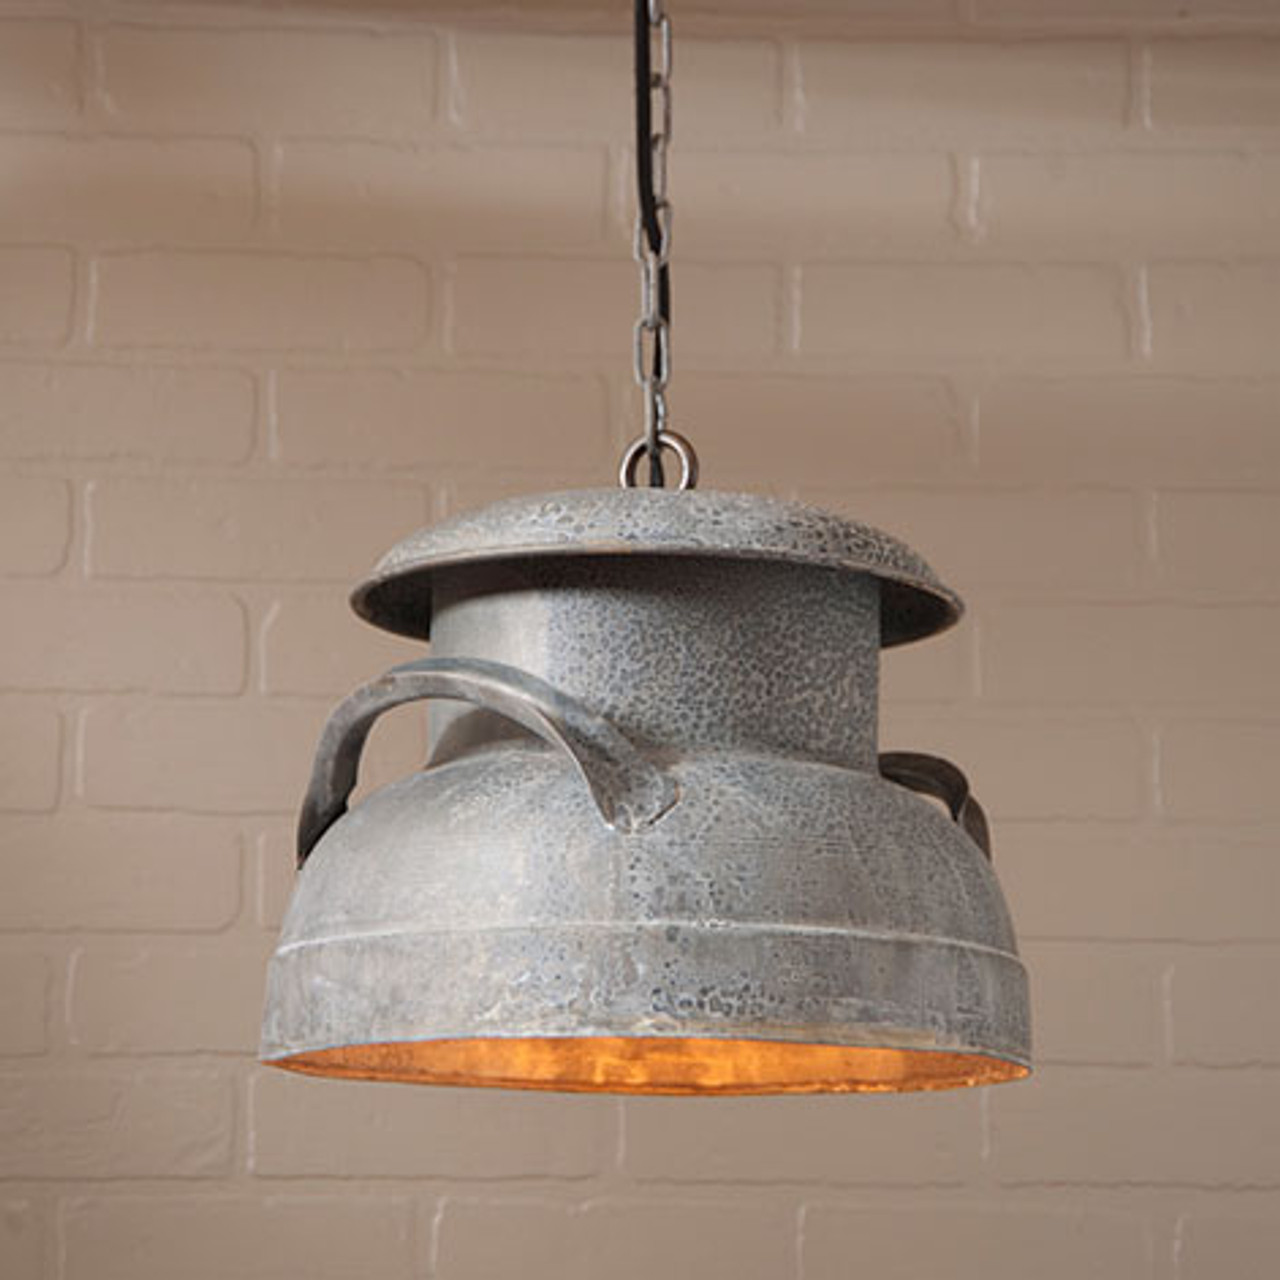 Let’s Shed Some Light on Rustic Farmhouse Lighting and Chandeliers